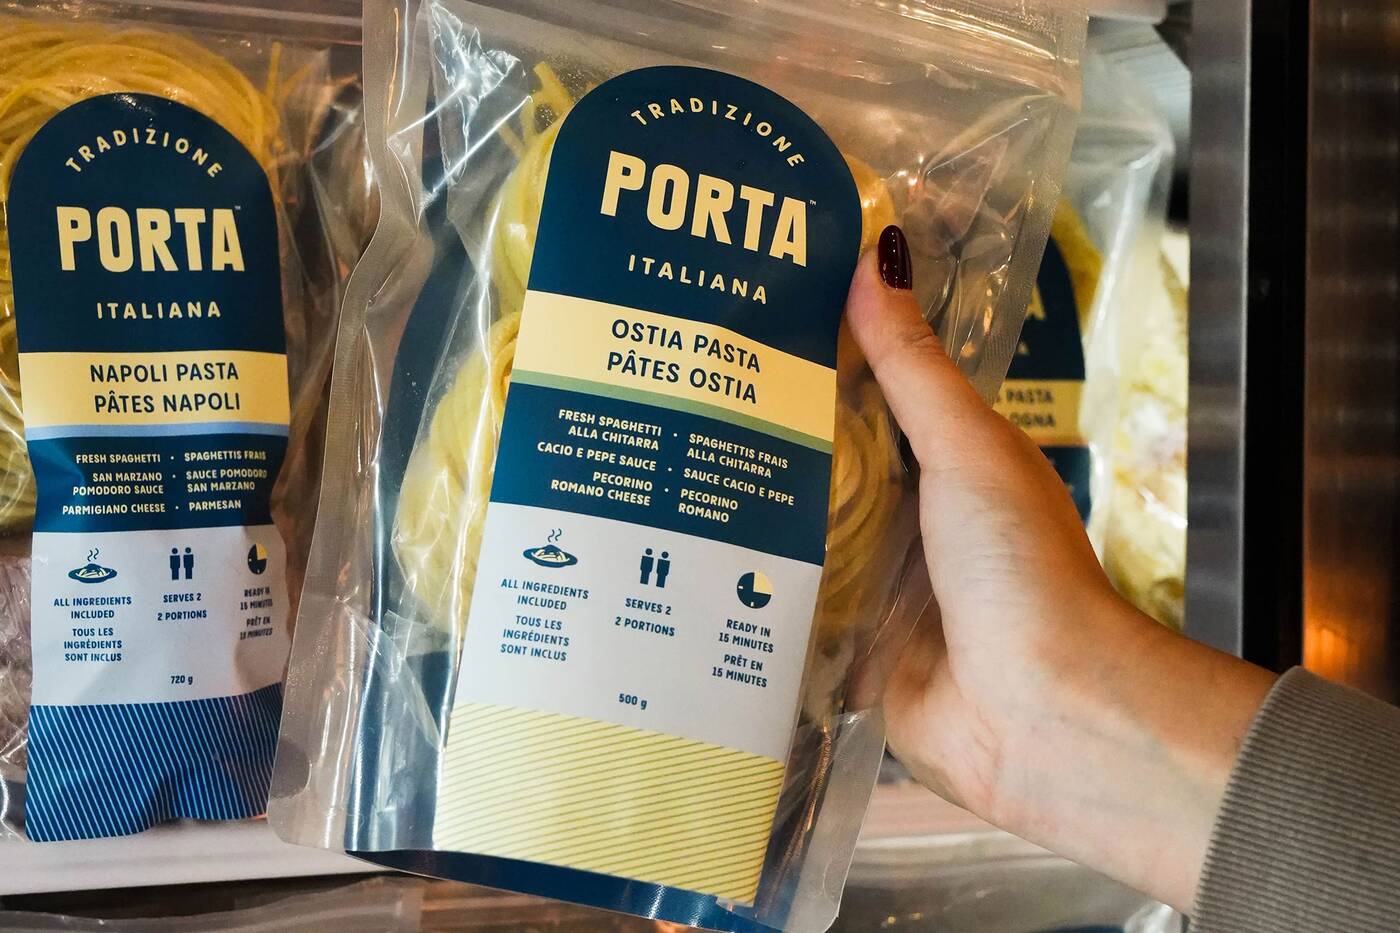 Ontario's favourite ready-made Italian meals from PORTA are now at Longo's